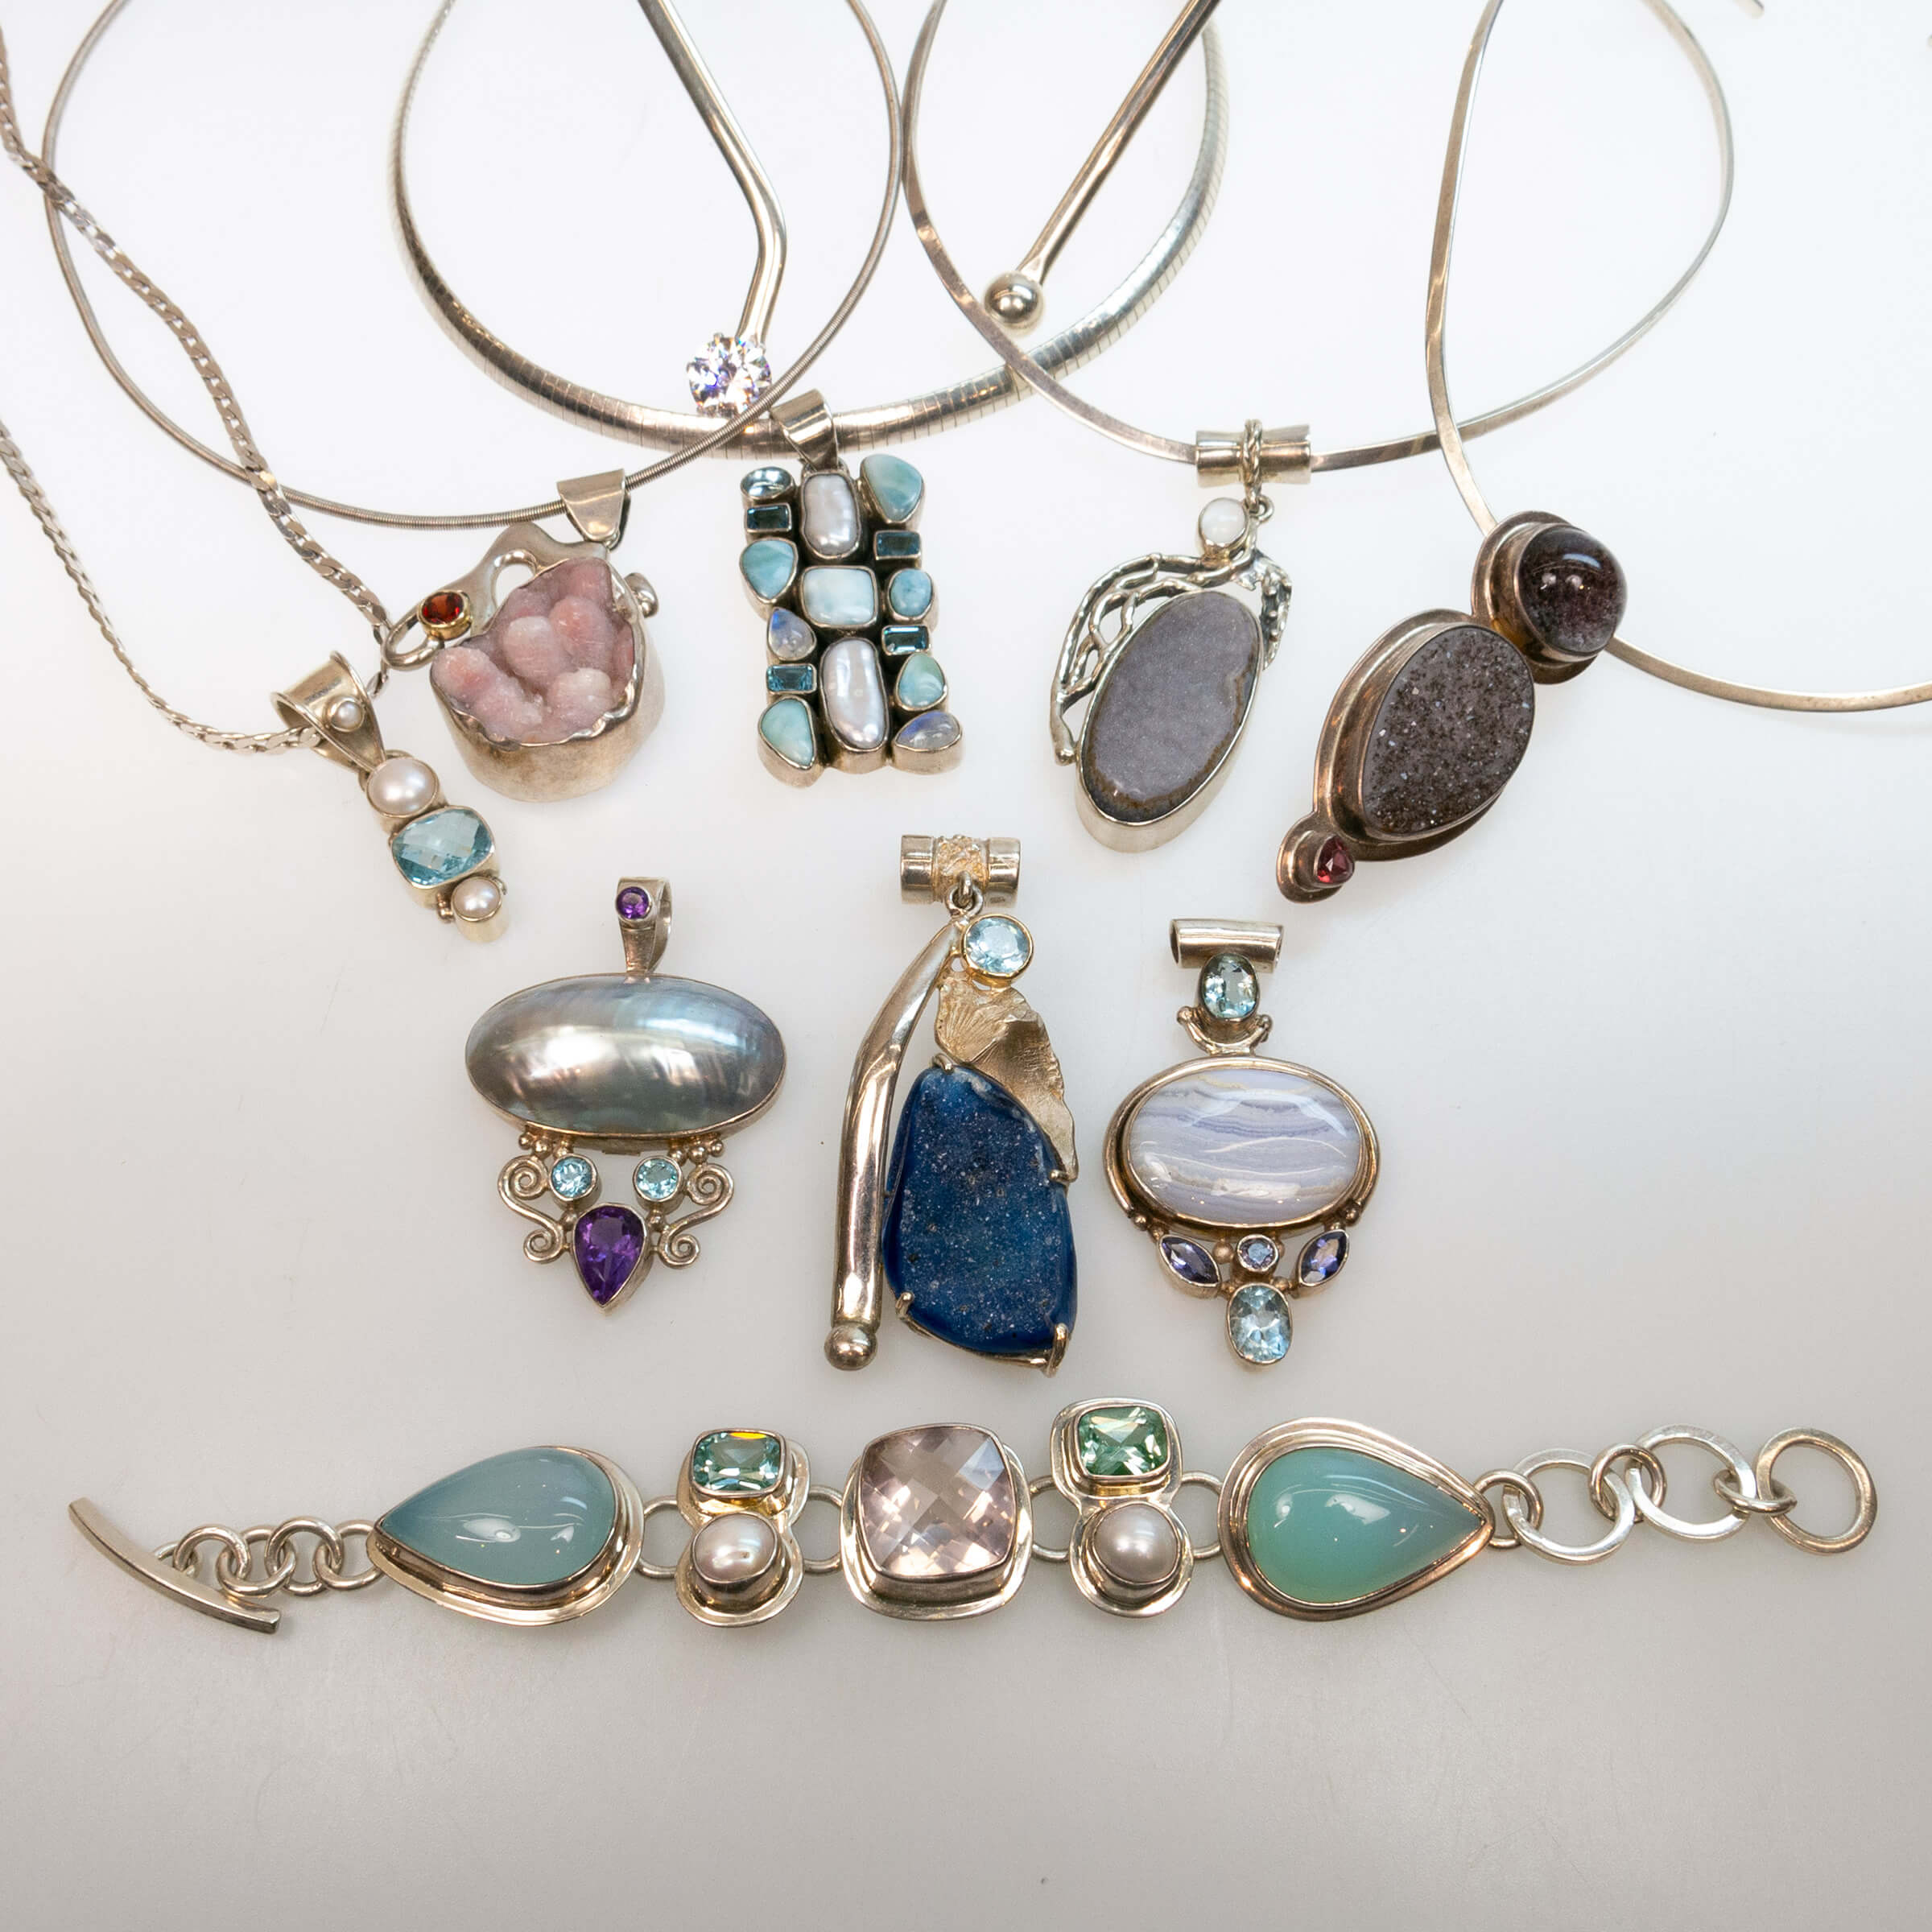 7 Various Sterling Silver Necklace And Pendants